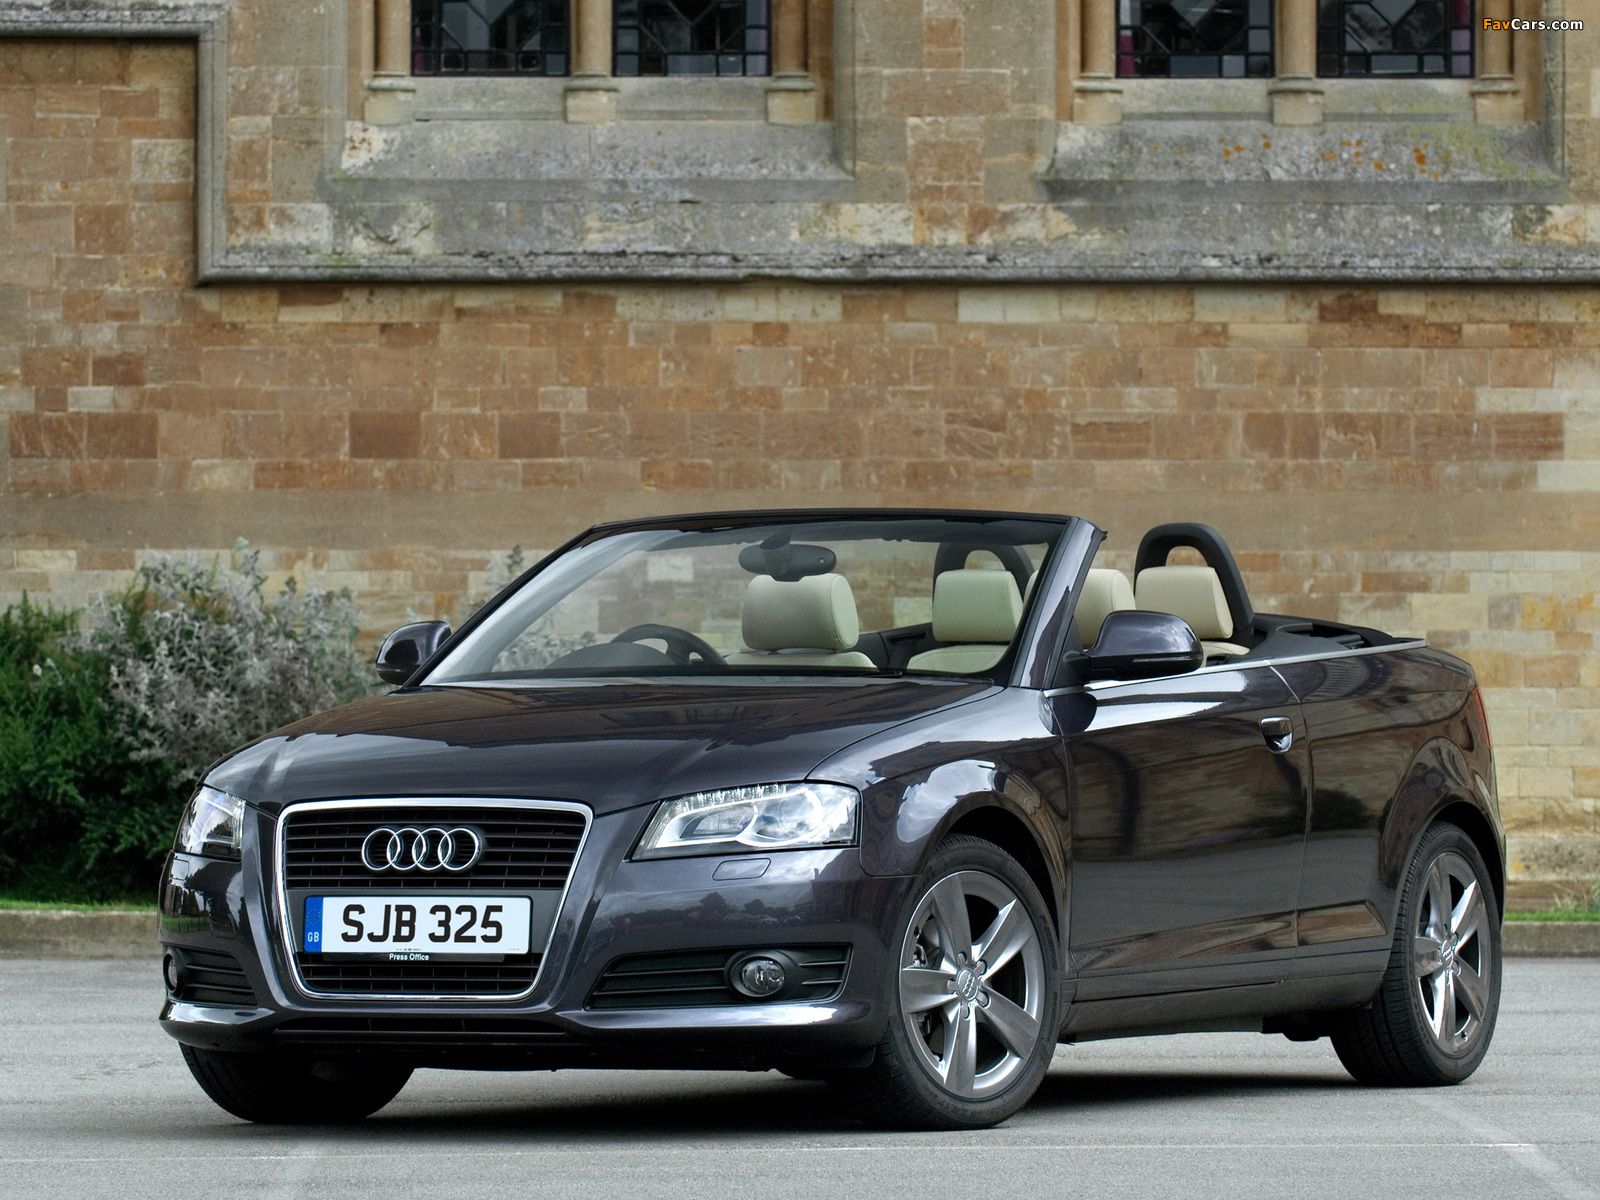 Audi A3 1.8T Cabriolet UK-spec 8PA (2008) wallpapers (1600 x 1200)